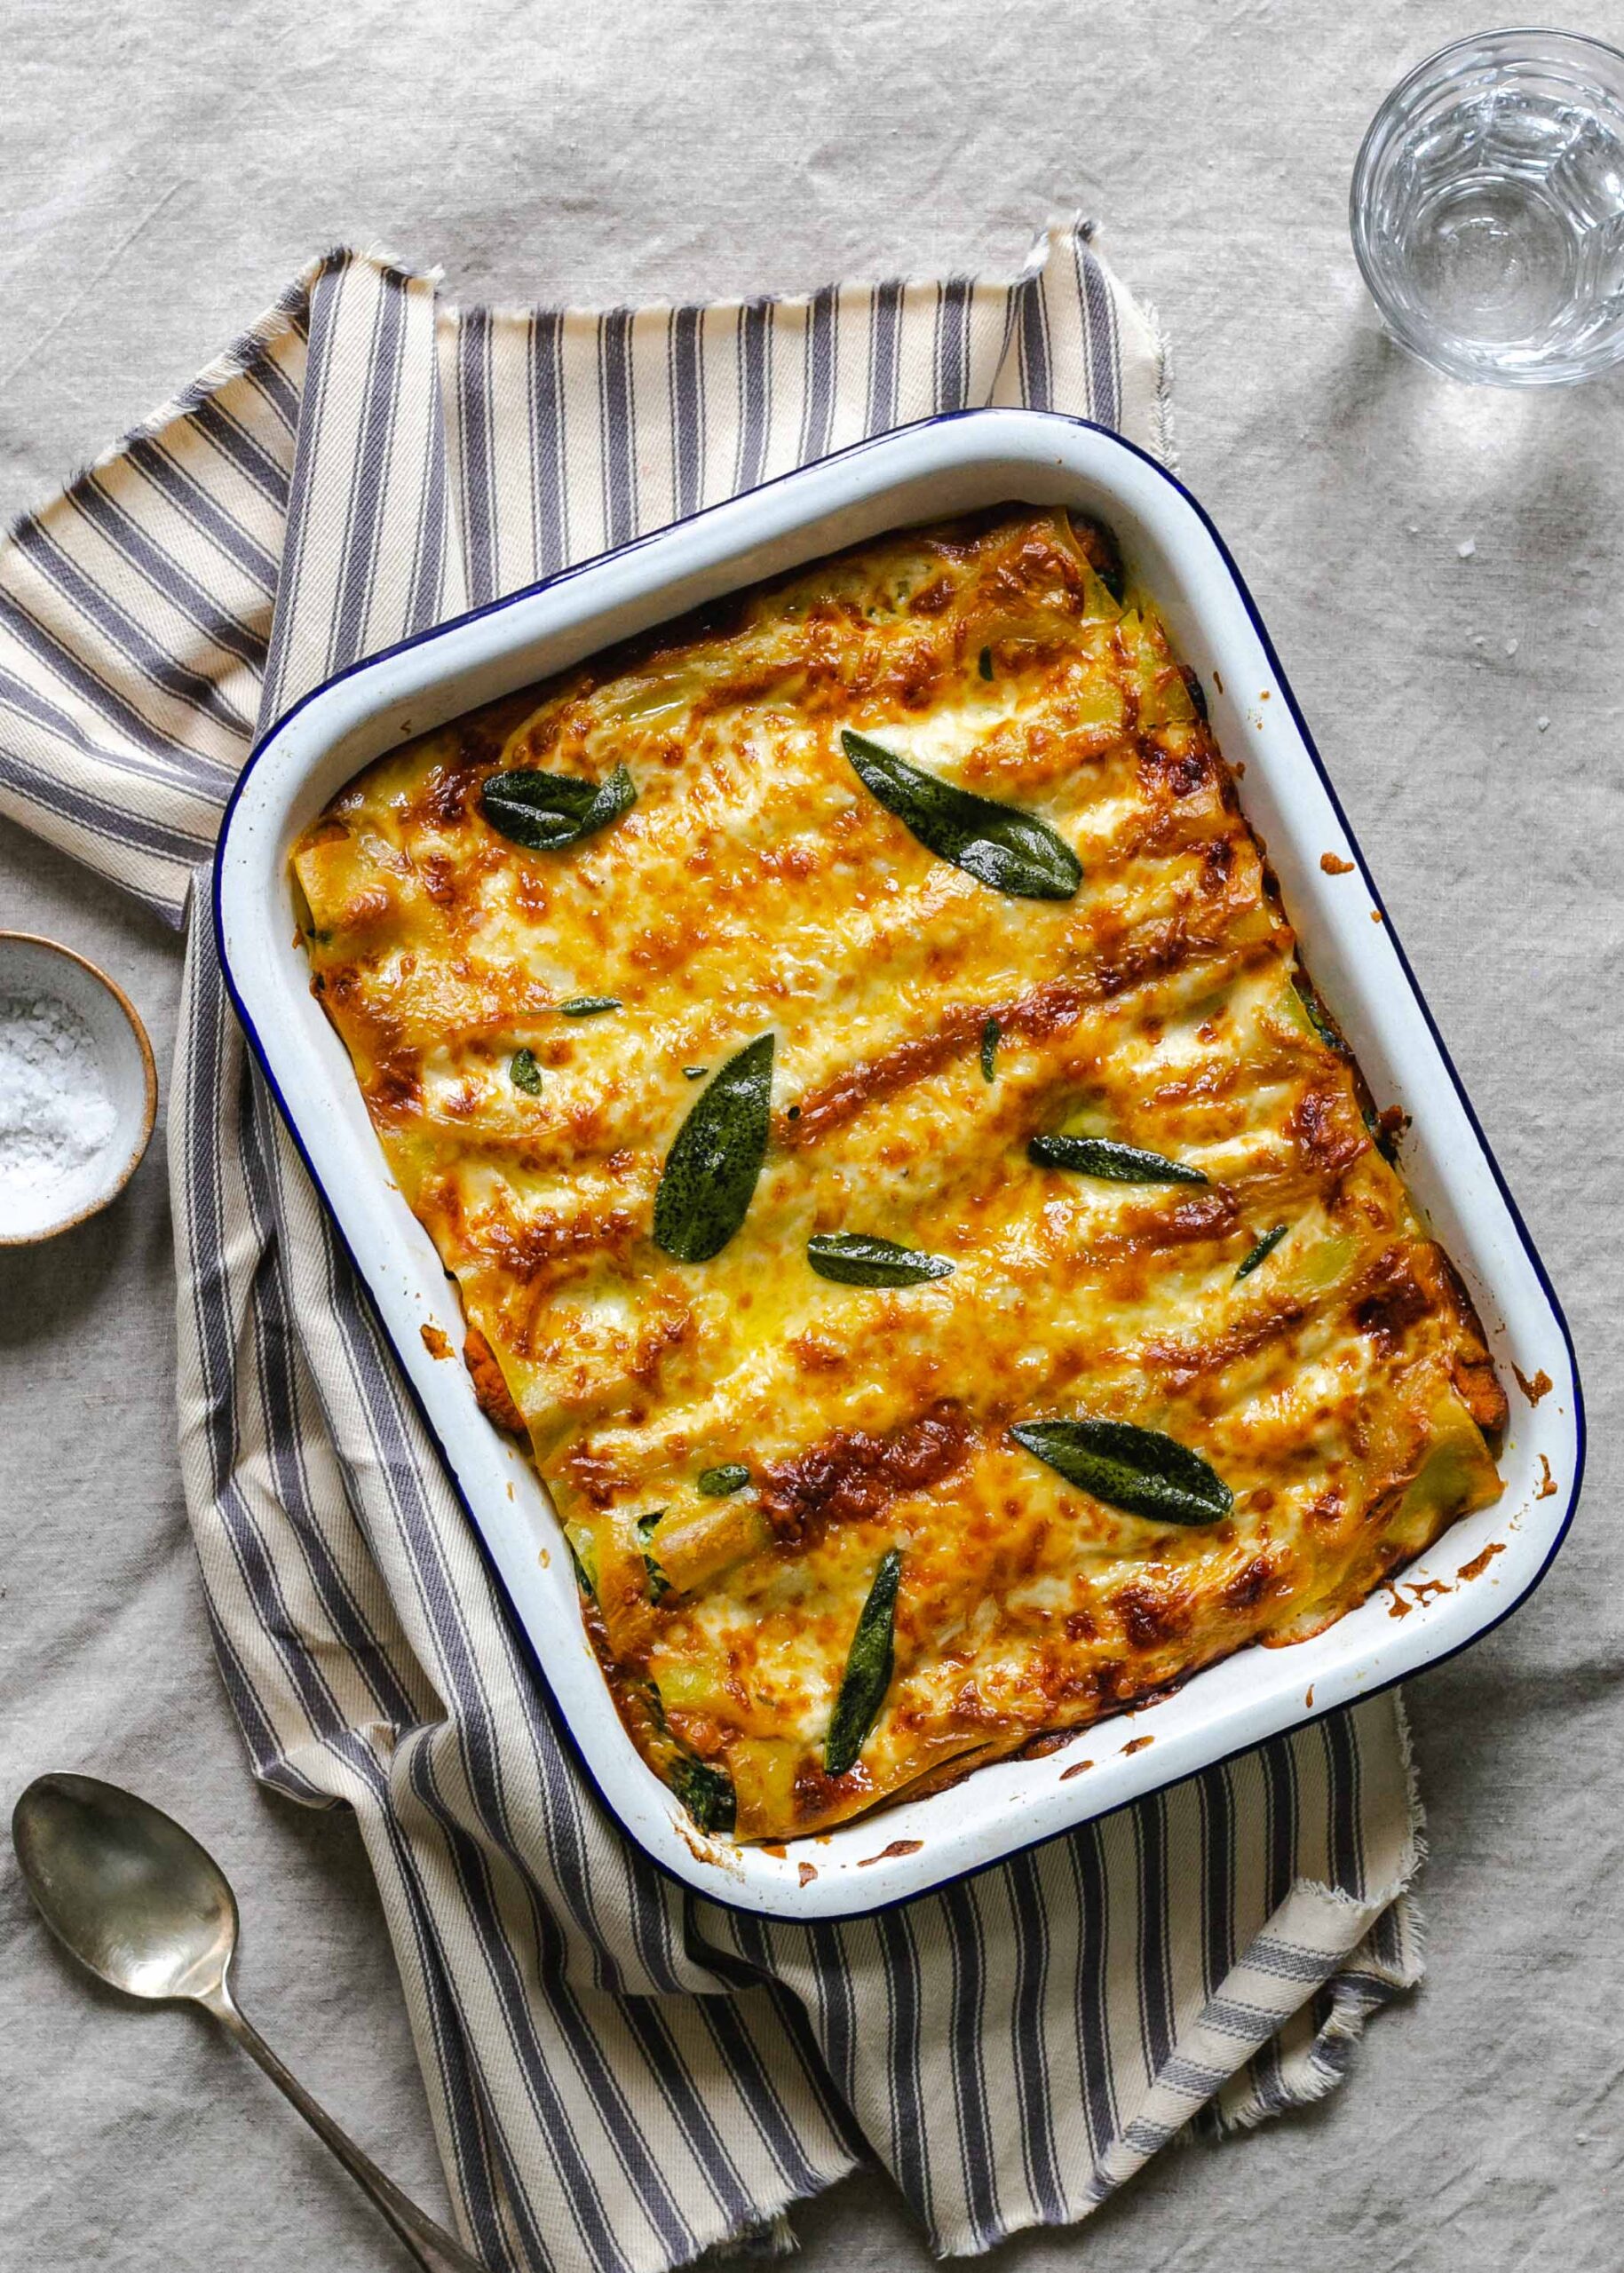 Ready to eat gluten free pumpkin, spinach and ricotta cannelloni